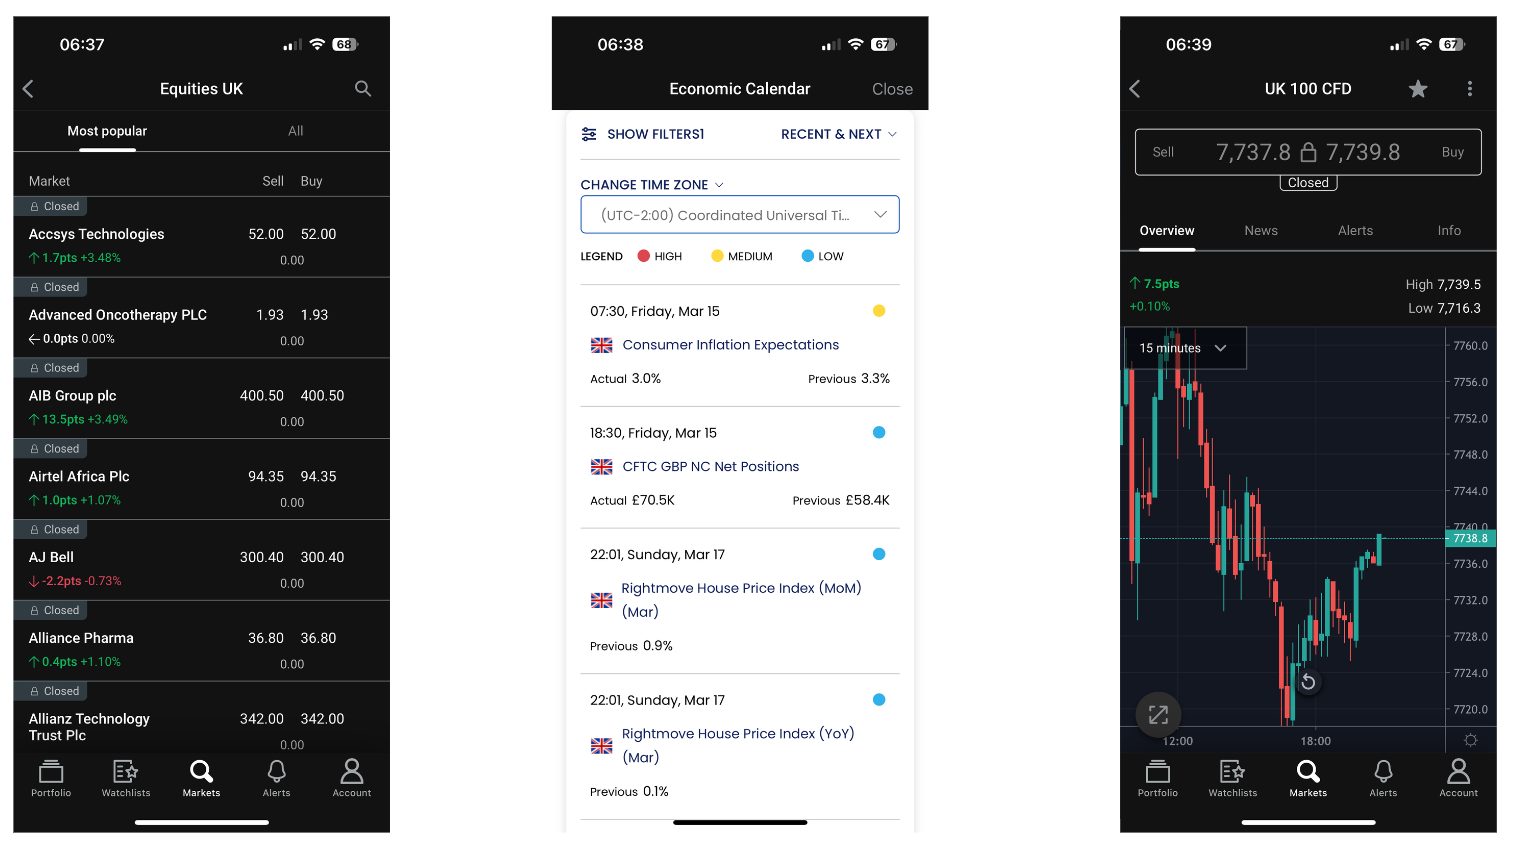 Trading tools on Forex.com UK investing app